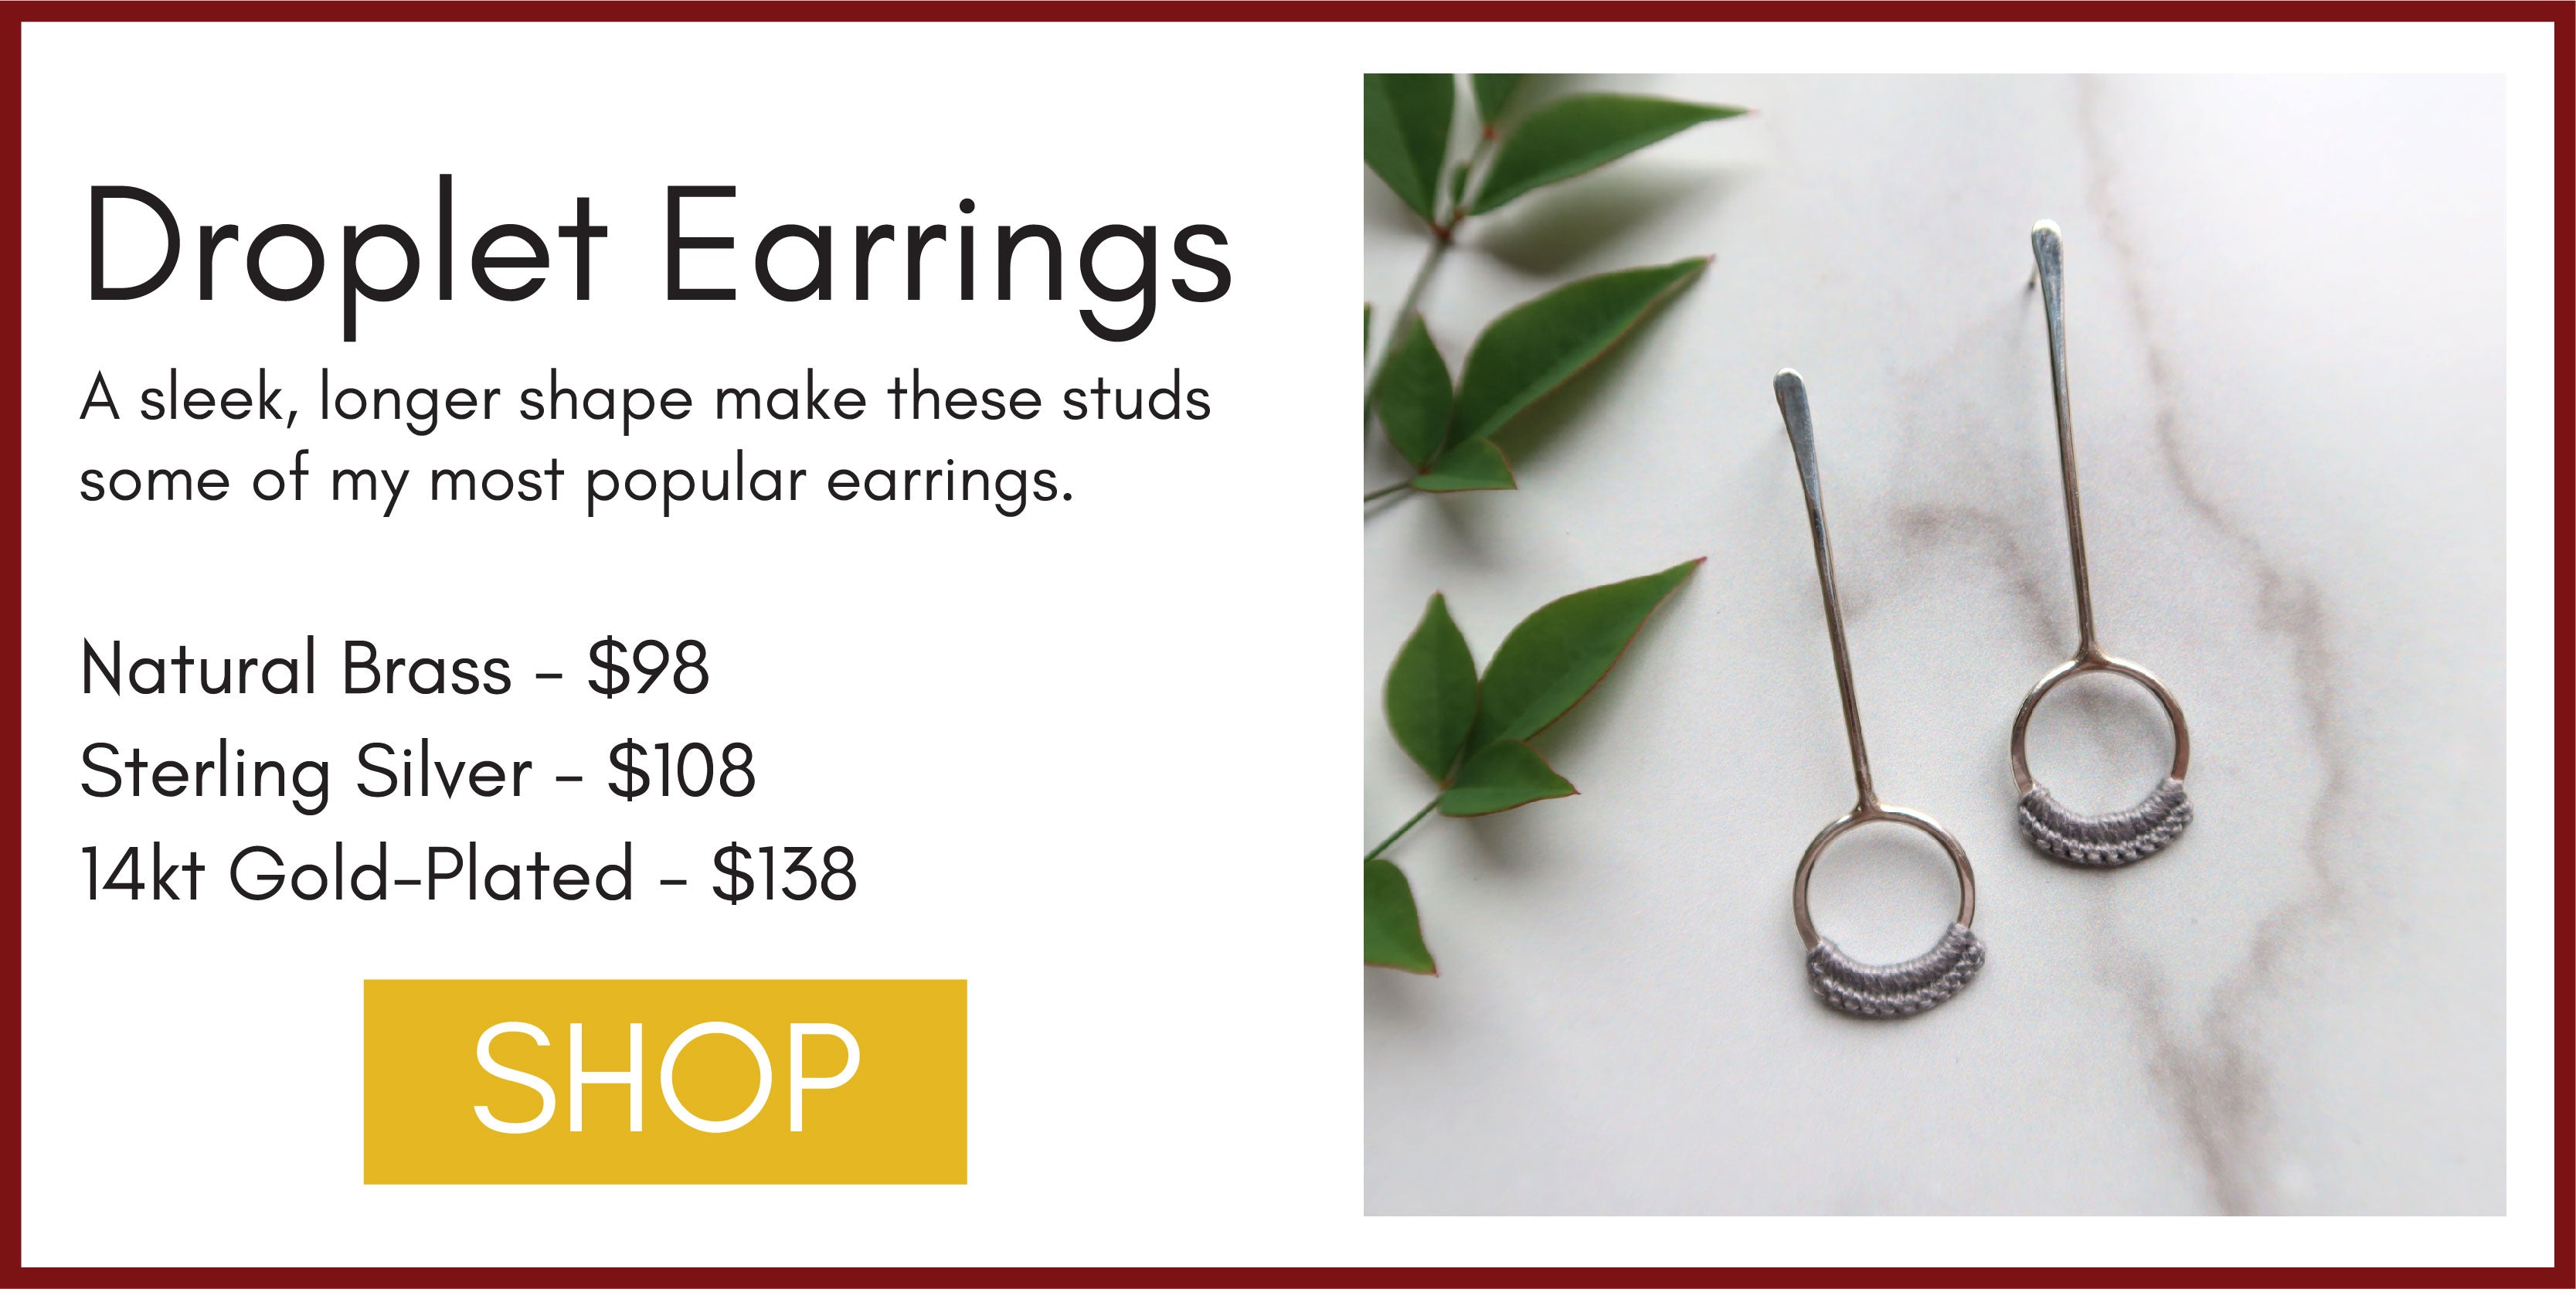 Graphic with title "Droplet Earrings" and an image that shows the Droplet Earrings in Slate with holiday greenery in the background